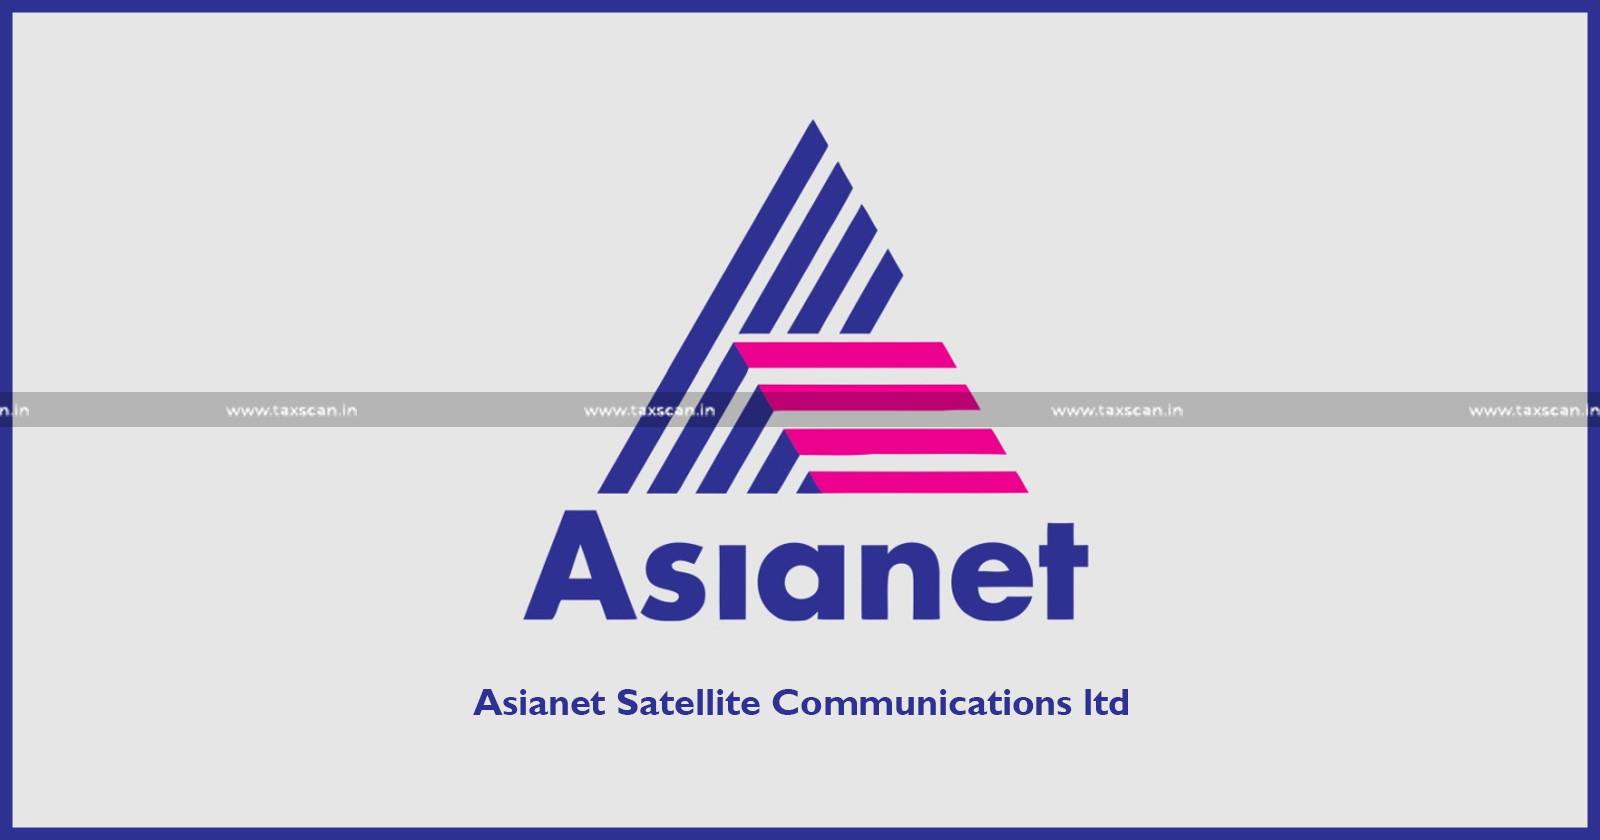 Relief to Asianet - Asianet - CESTAT quashes Order - Order - Line Extender - Broadcast Signal Amplifier - ground of Incorrect Classification - Incorrect Classification - CESTAT - taxscan